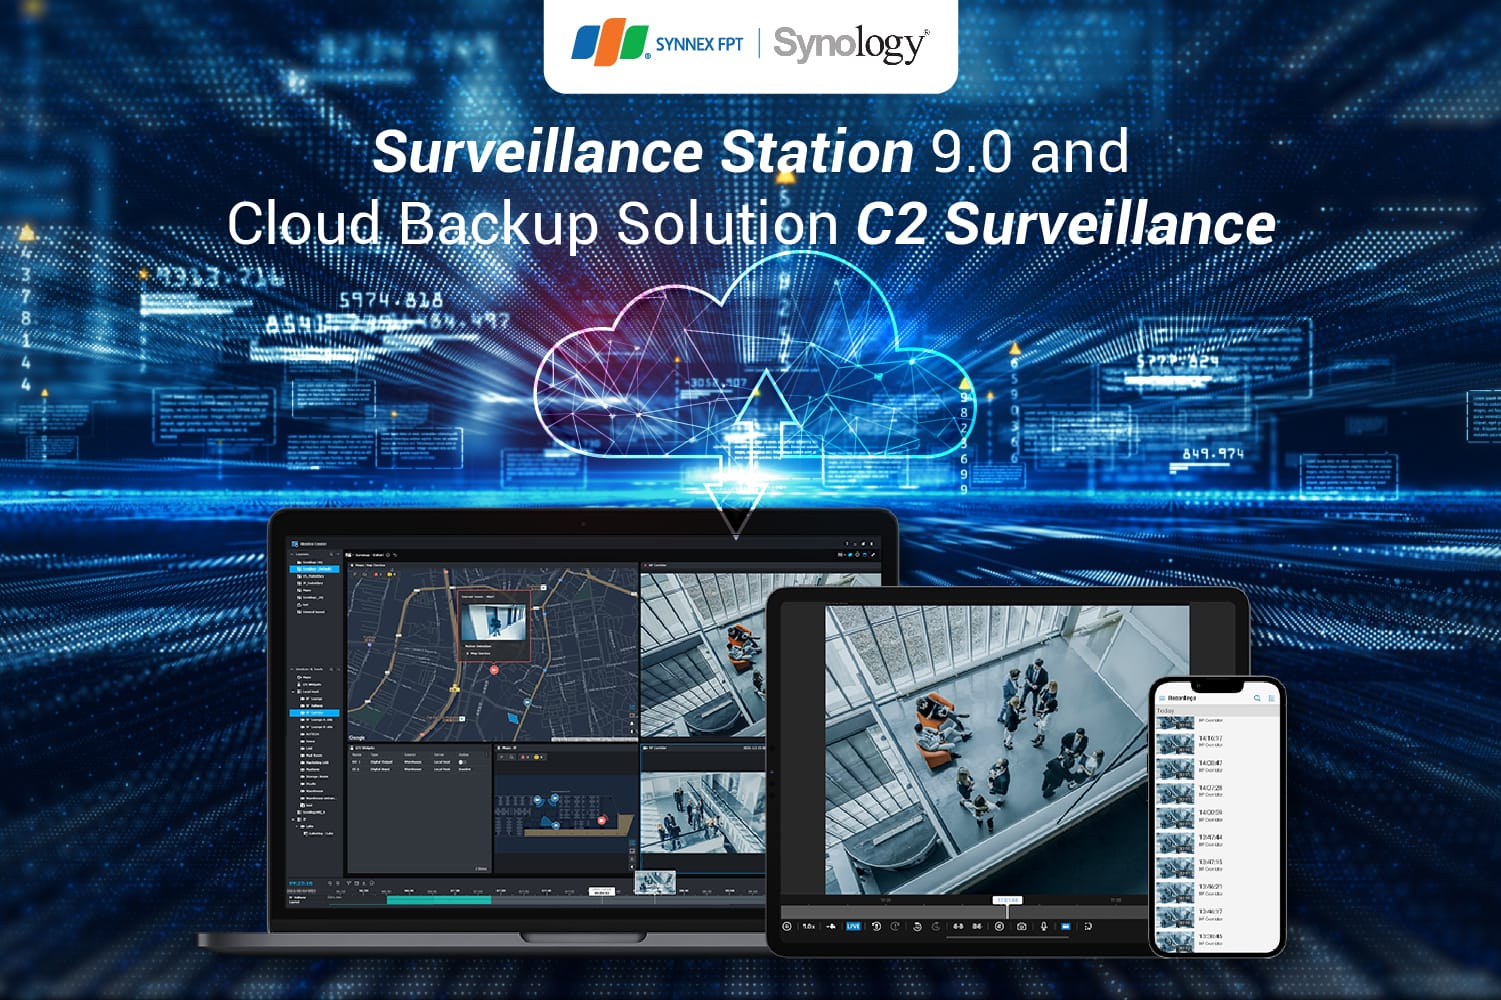 Synology® Launches Surveillance Station 9.0 and Cloud Backup